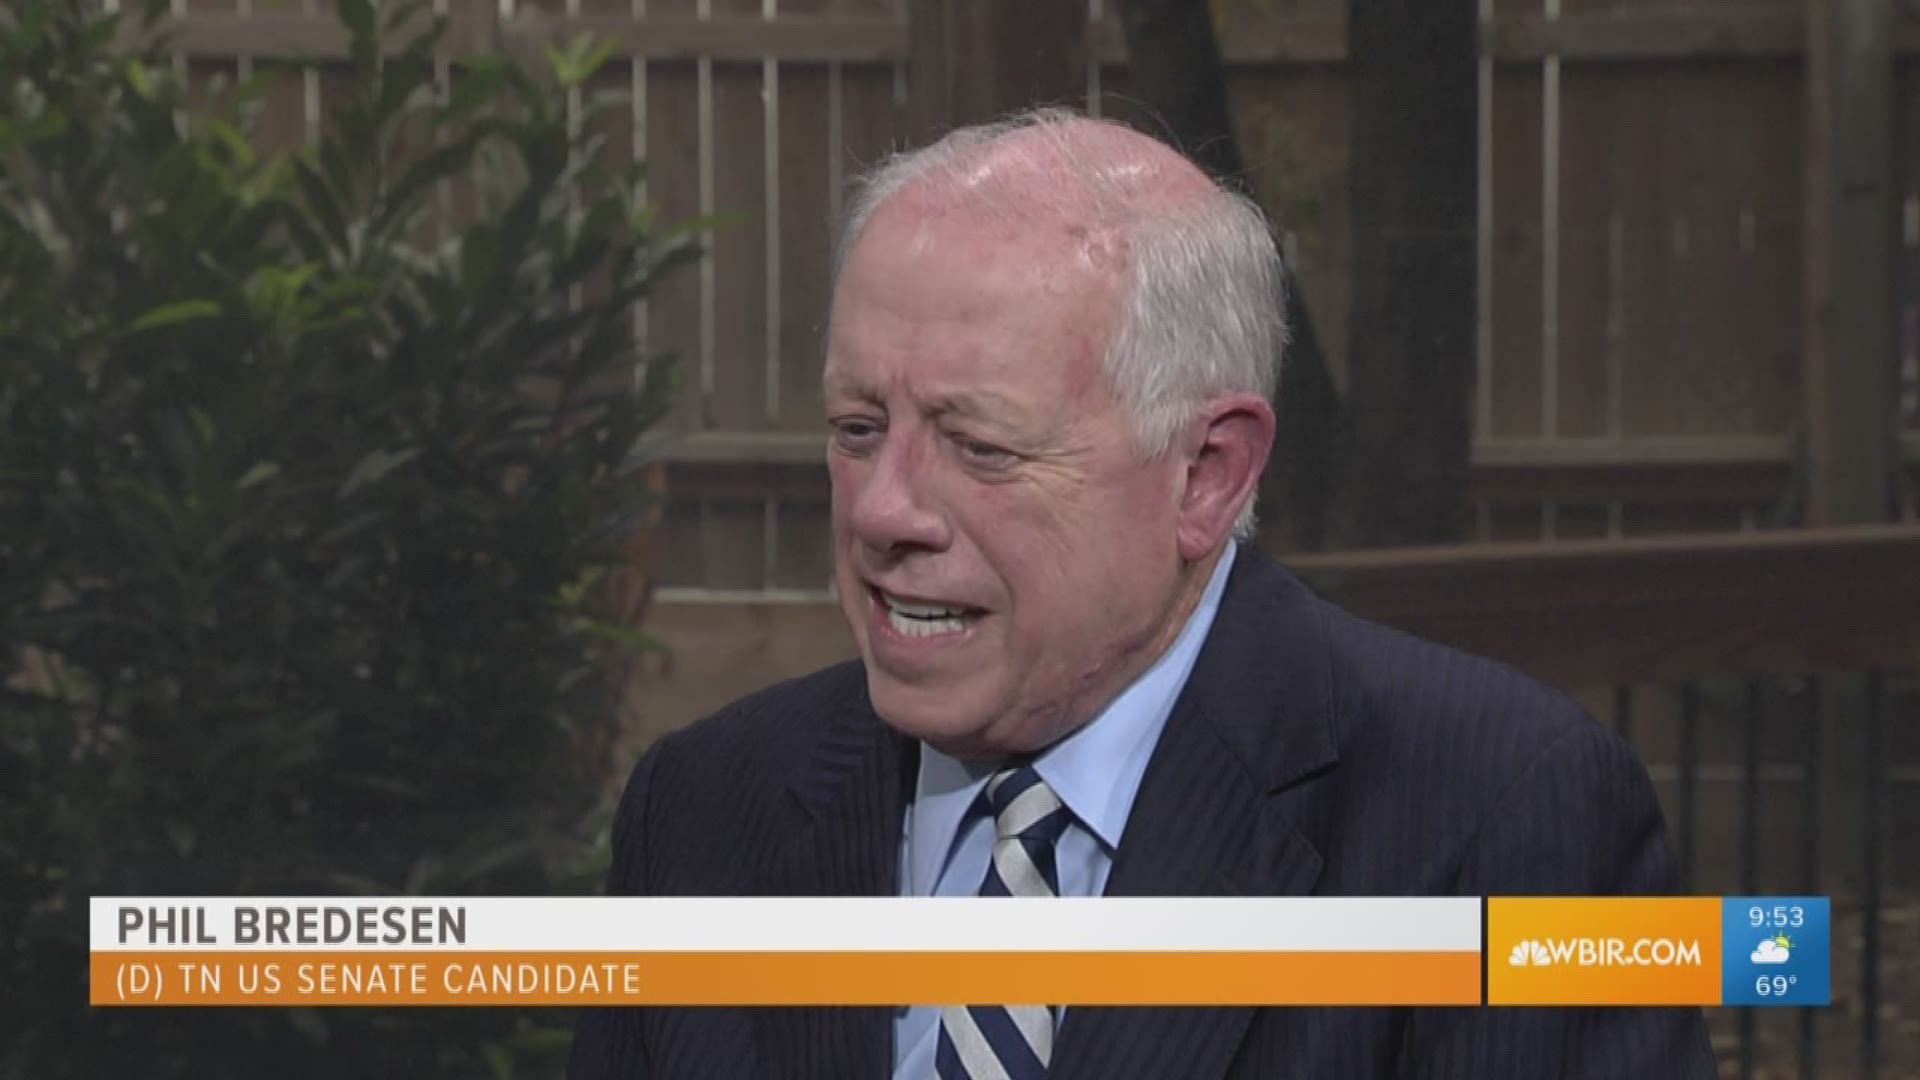 Former Gov. Phil Bredesen, candidate for U.S. senator from Tennessee, talks about his race.